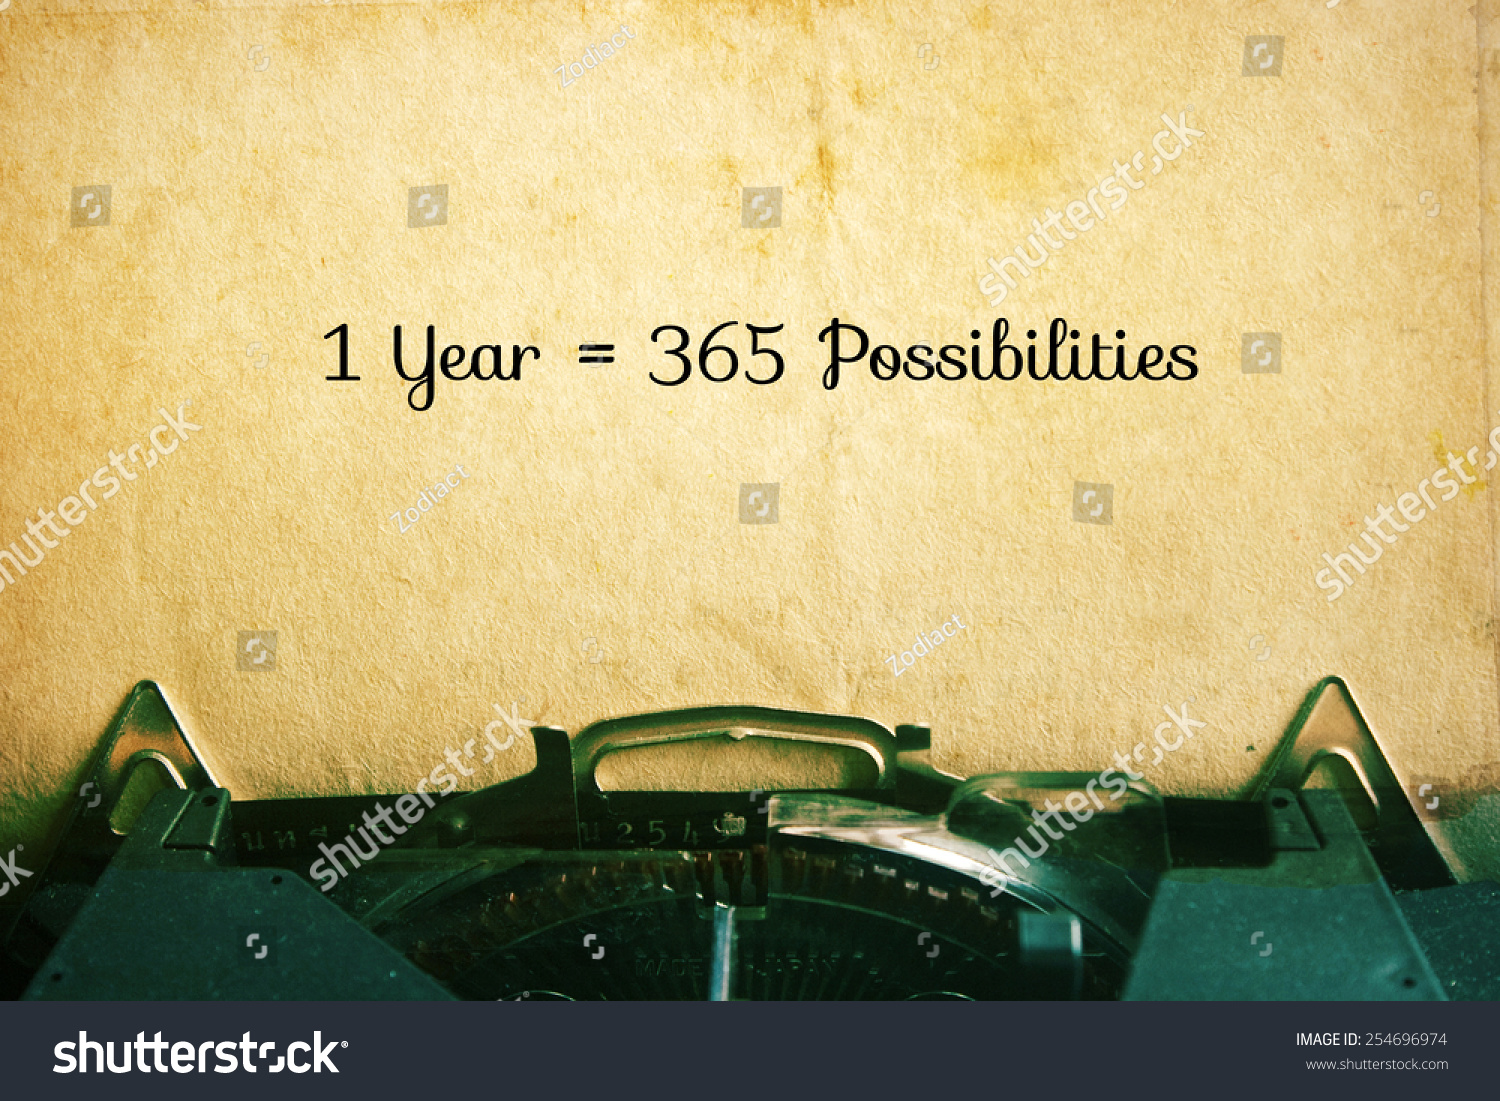 1 Year = 365 Possibilities: Inspiration Motivational Quotes on Vintage Paper Background. #254696974